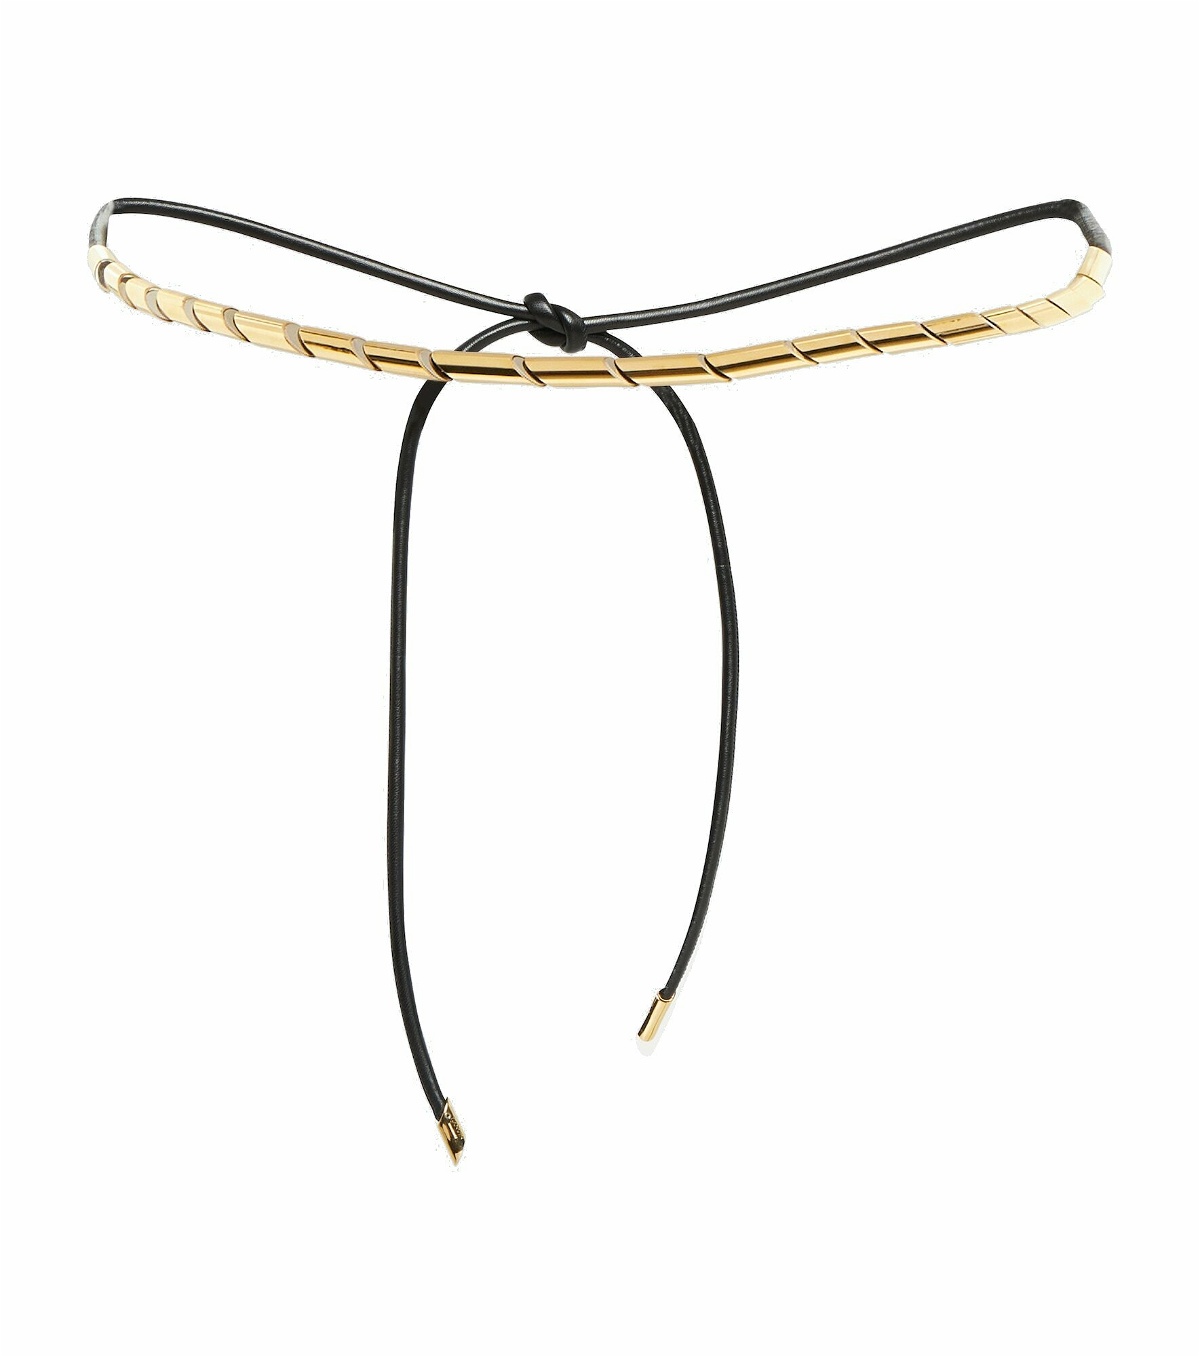 Lanvin - Coiled brass and leather belt Lanvin